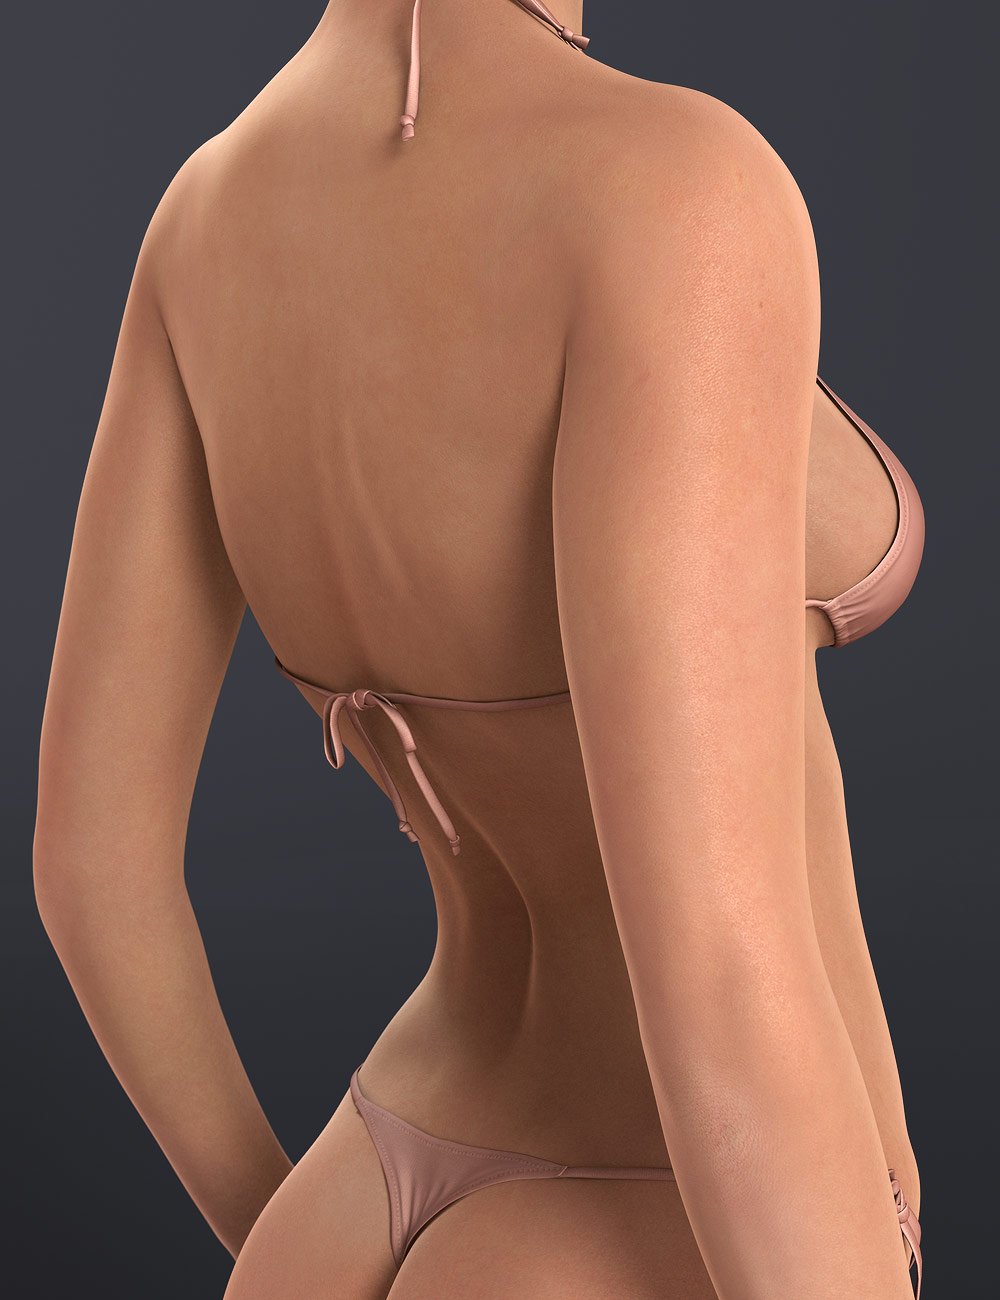 Victoria 5 by: , 3D Models by Daz 3D